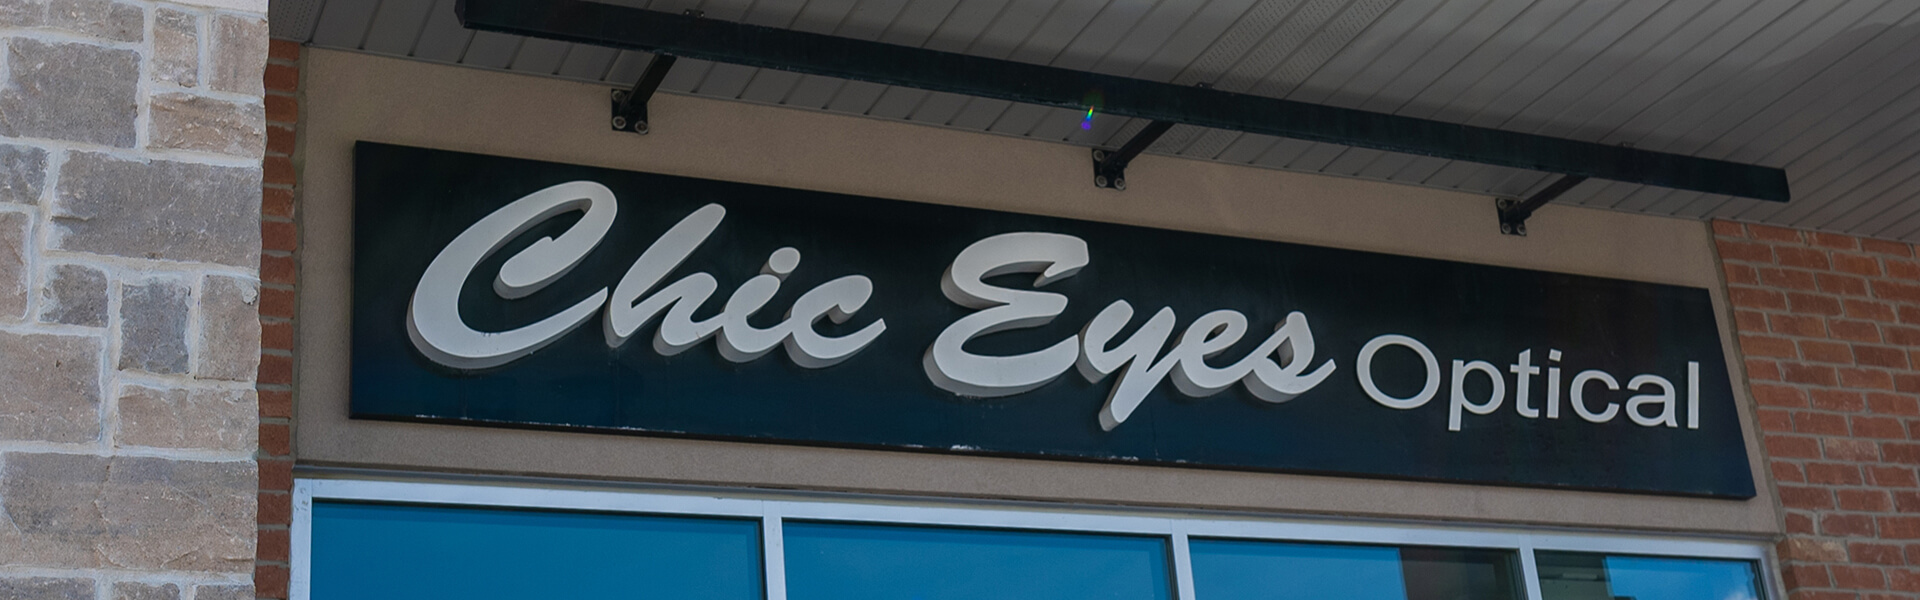 Chic Eyes Optical - Exterior - Banner